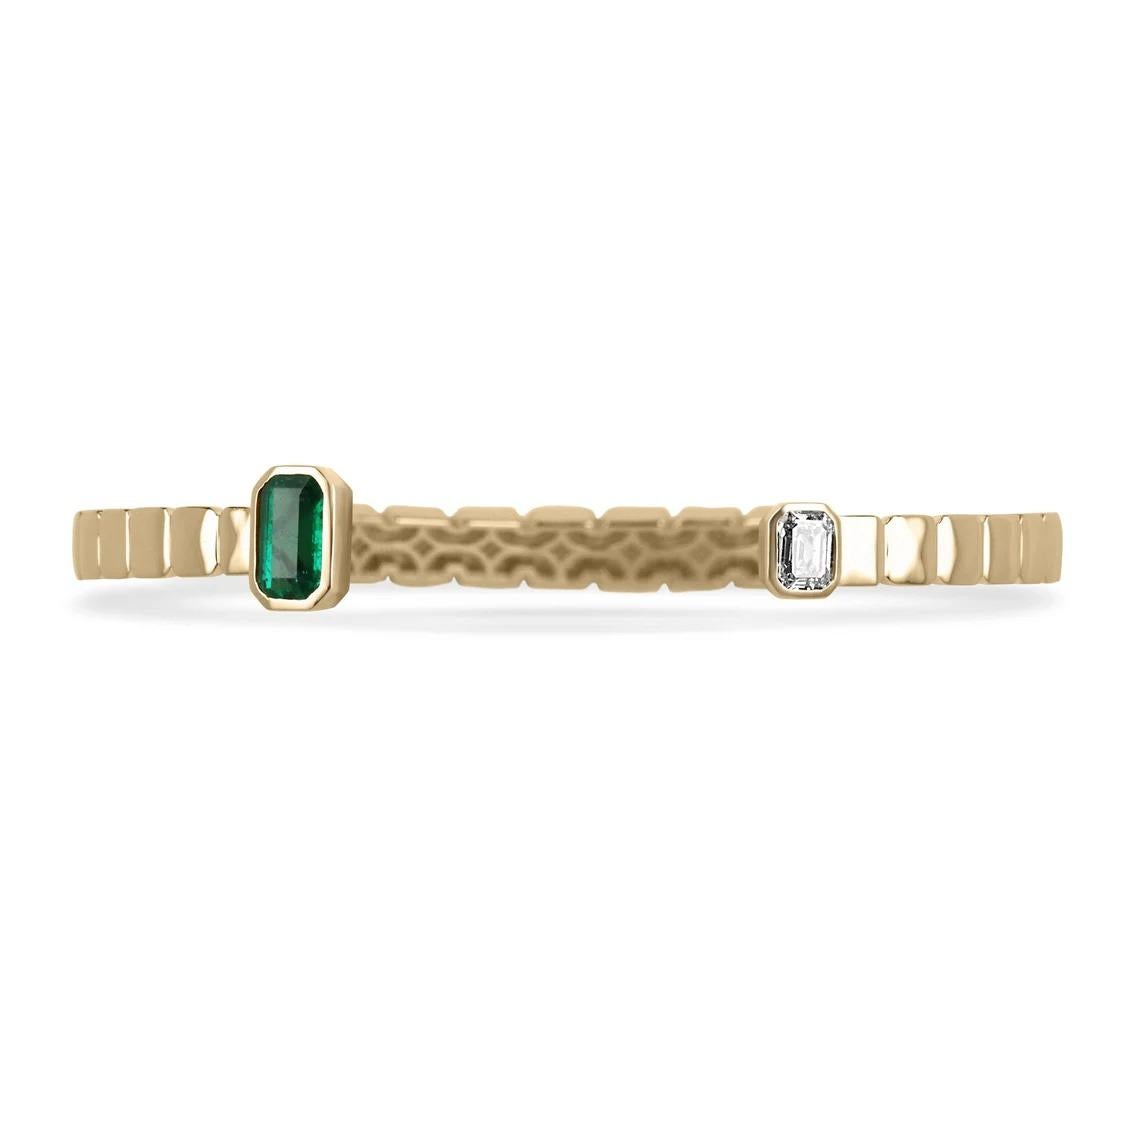 Setting Style: Bezel
Setting Material: 18K Yellow Gold
Setting Weight: 10.4 Grams

Main Stone: Emerald
Shape: Emerald Cut
Weight: 1.22-Carats AAA Grade
Clarity: Semi-Transparent
Color: Dark Rich Green
Luster: Excellent-Very Good
Treatments: Natural,